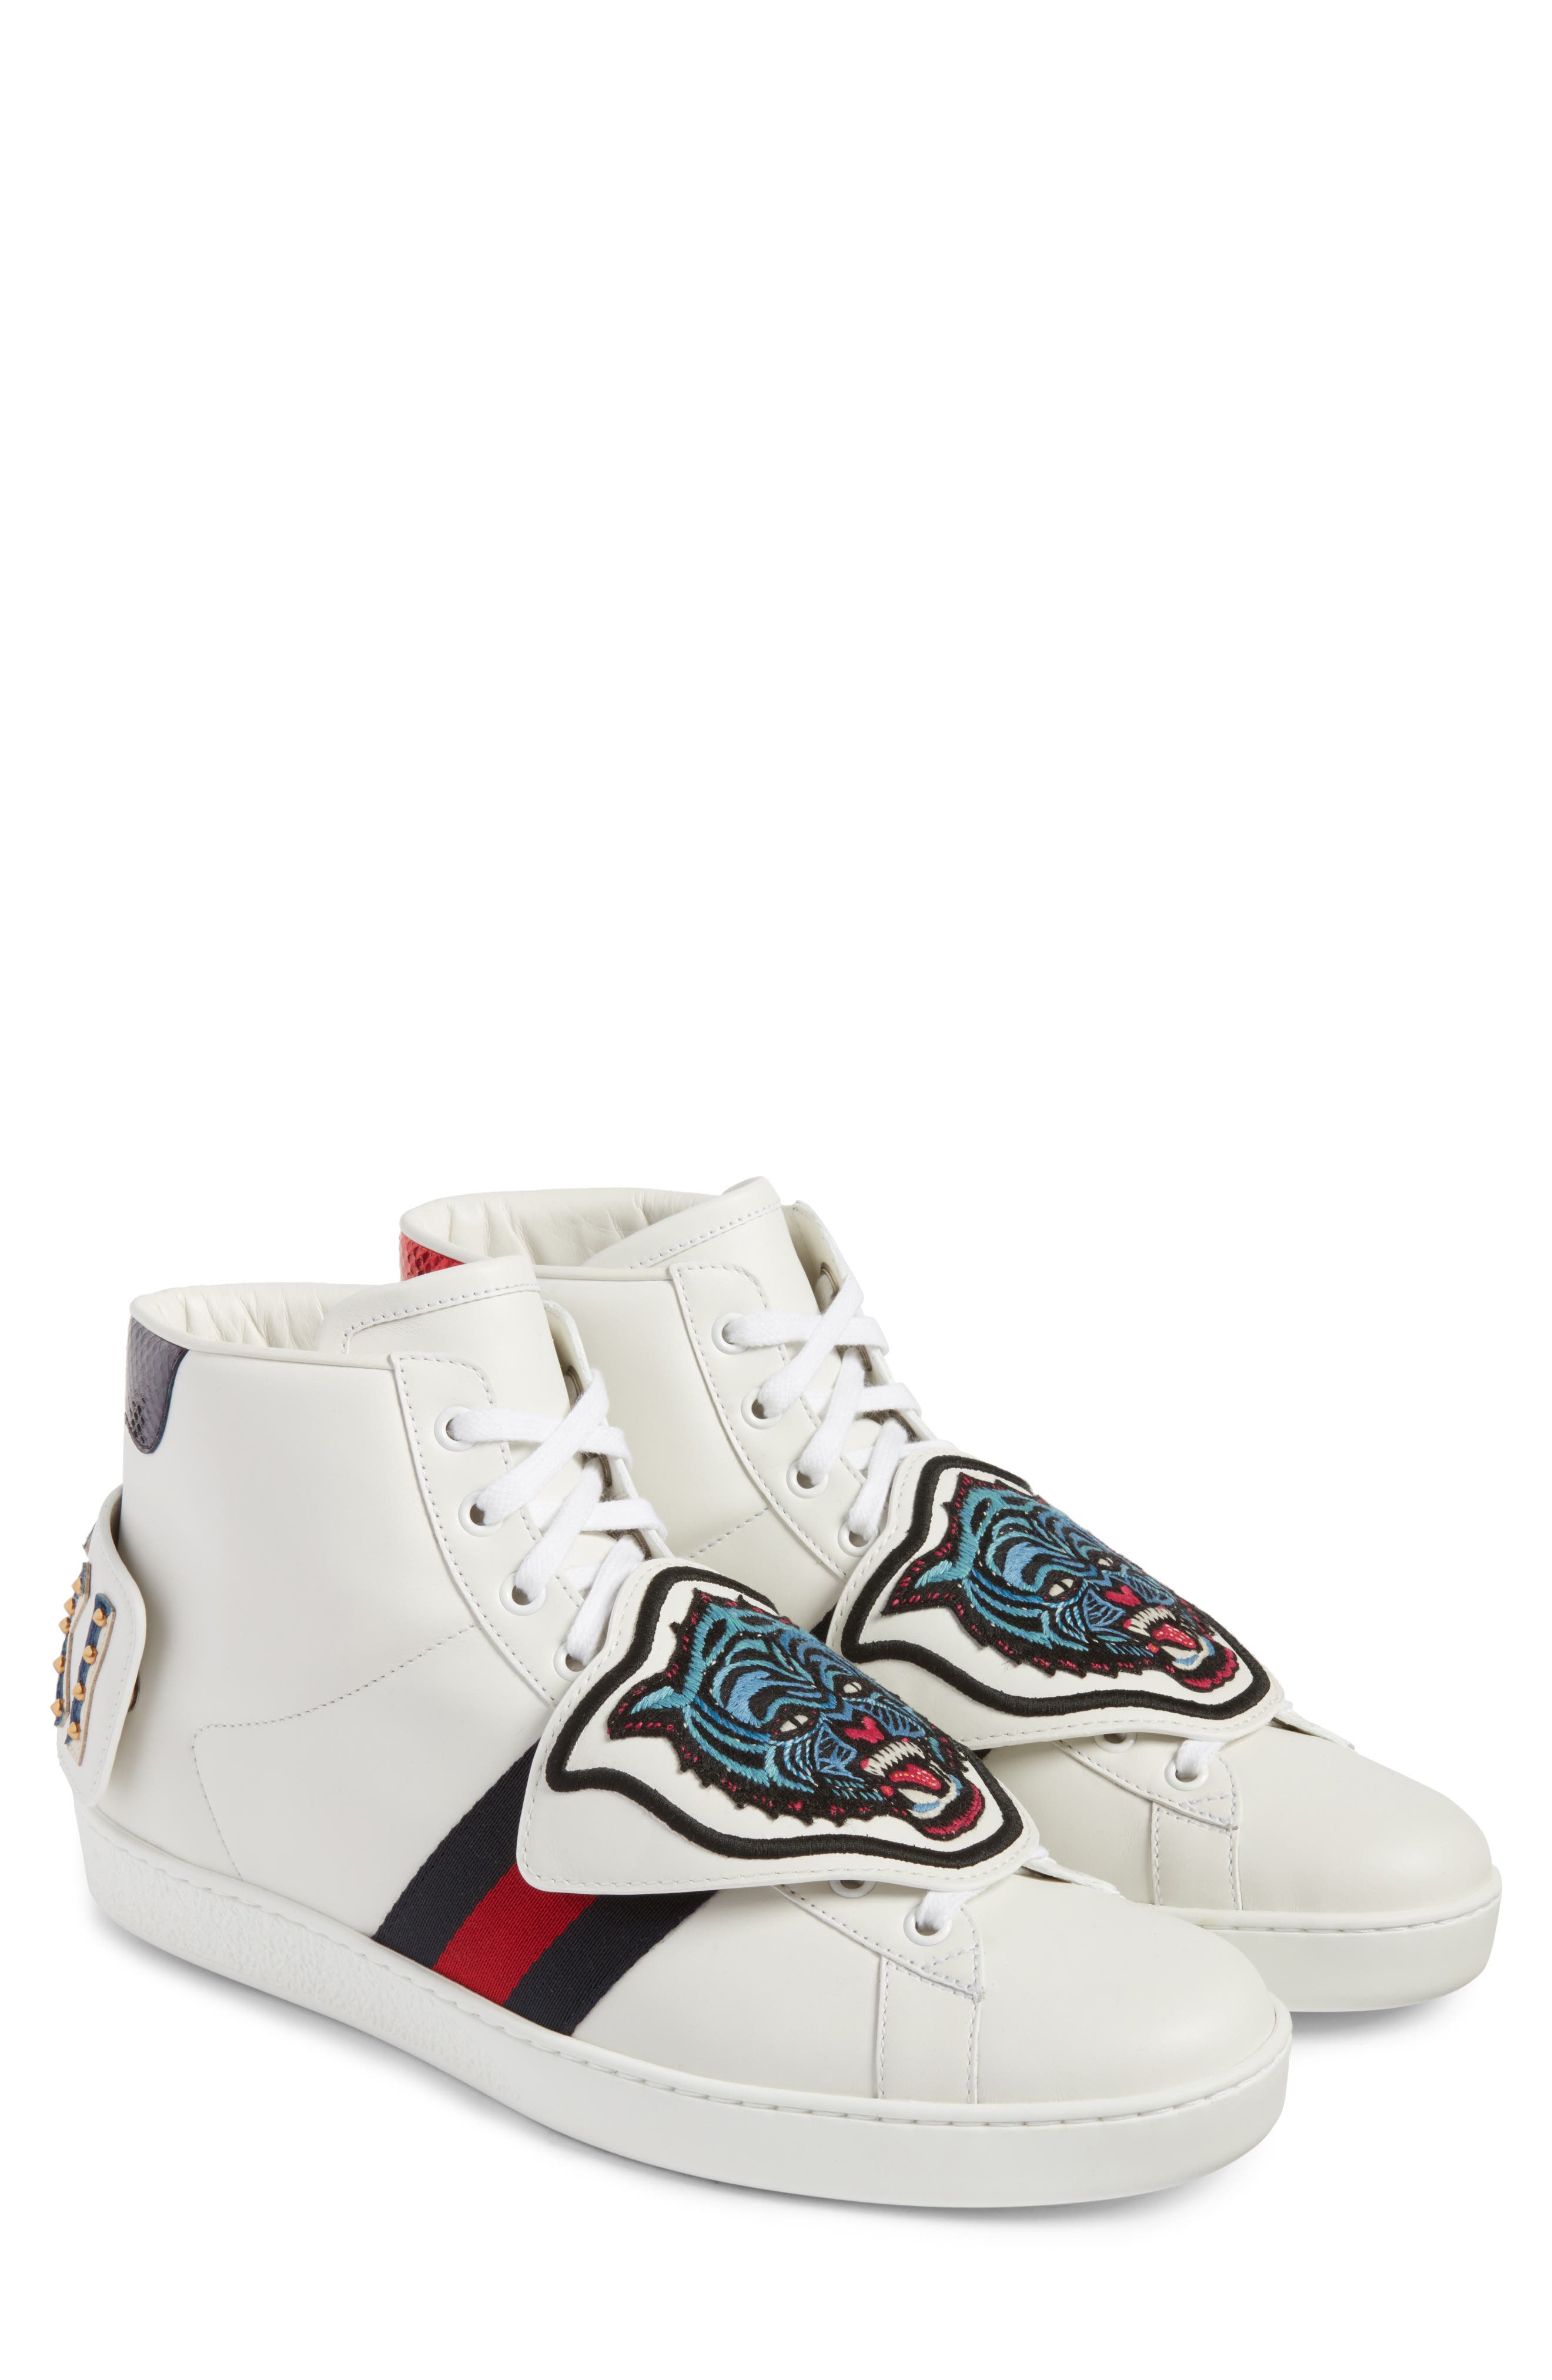 gucci shoes with patches